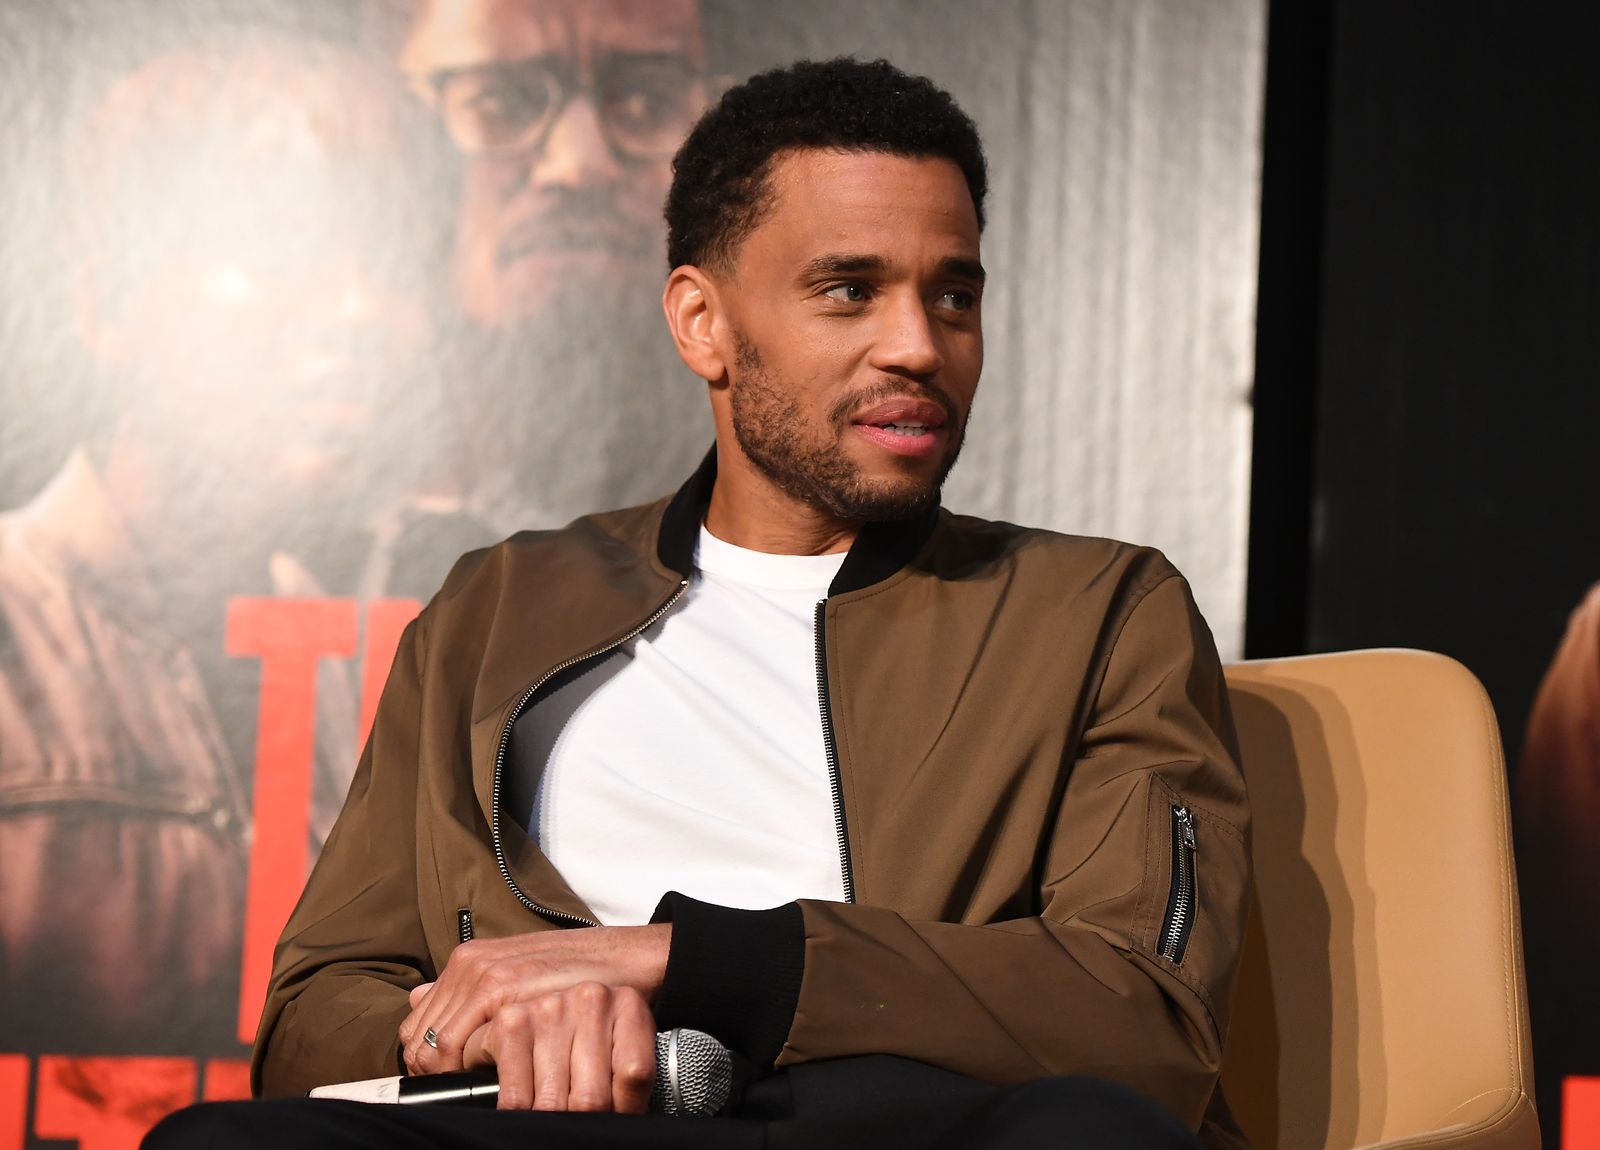 Actor Michael Ealy onstage at "The Intruder" Clark Atlanta University Spring Fest 2019 at Clark Atlanta University Student Center on April 23, 2019 | Photo: Getty Images